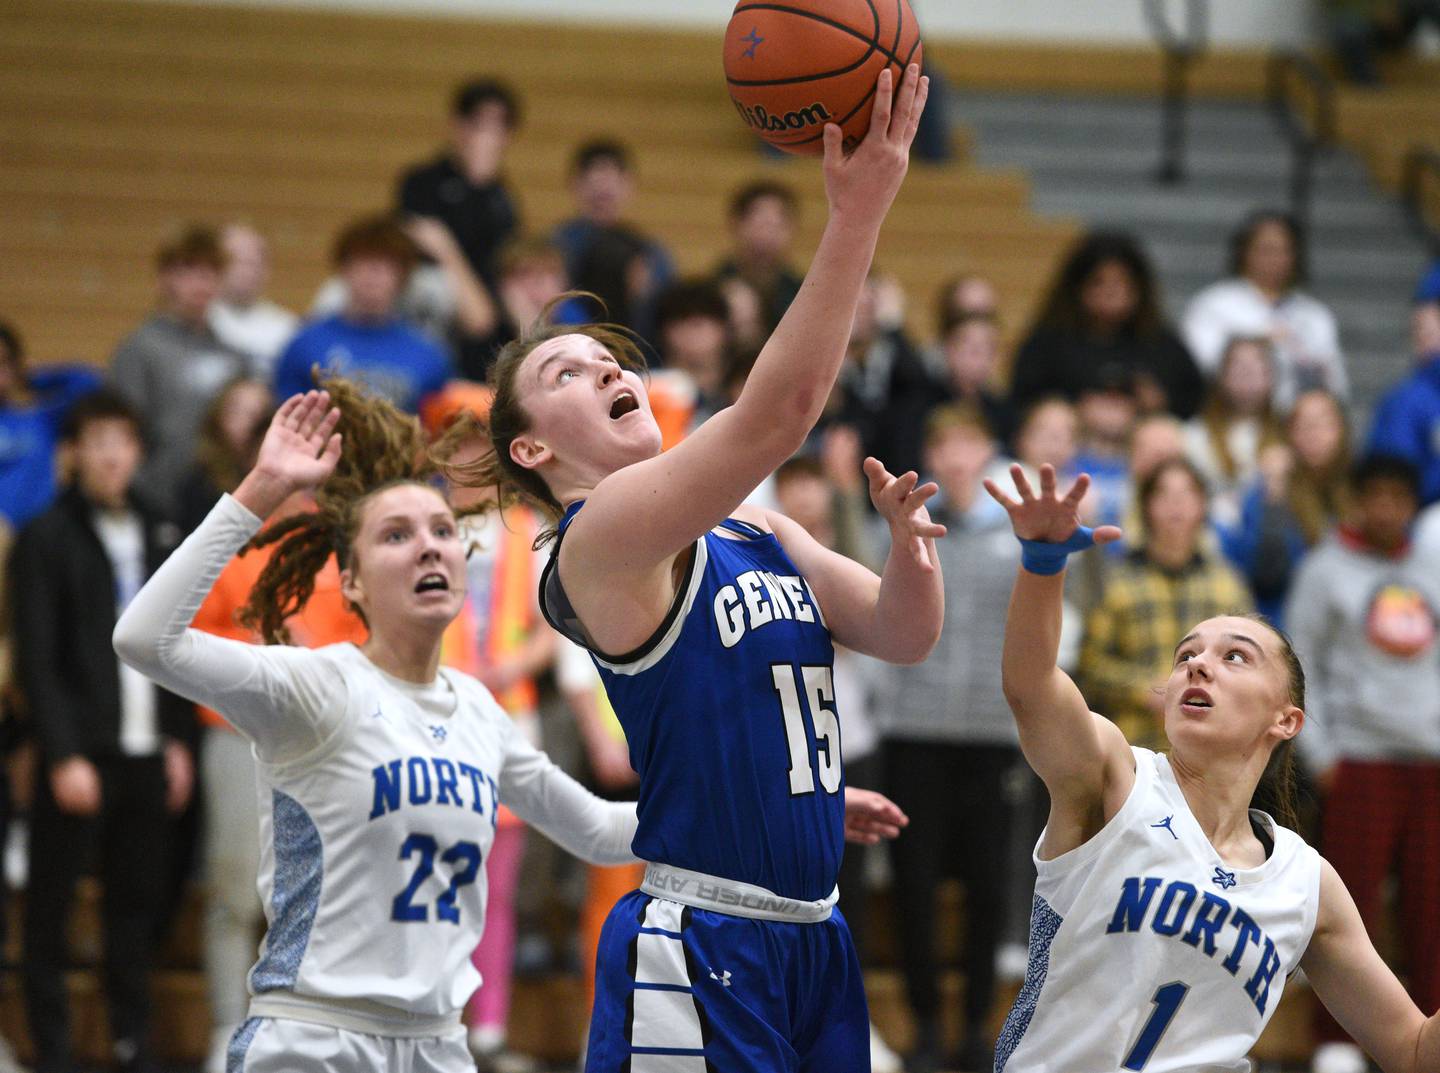 Geneva's Cassidy Arni (15) takes a shot between St. Charles North's Katrina Stack (22) and Laney Stark during Thursday’s girls basketball game in St. Charles.